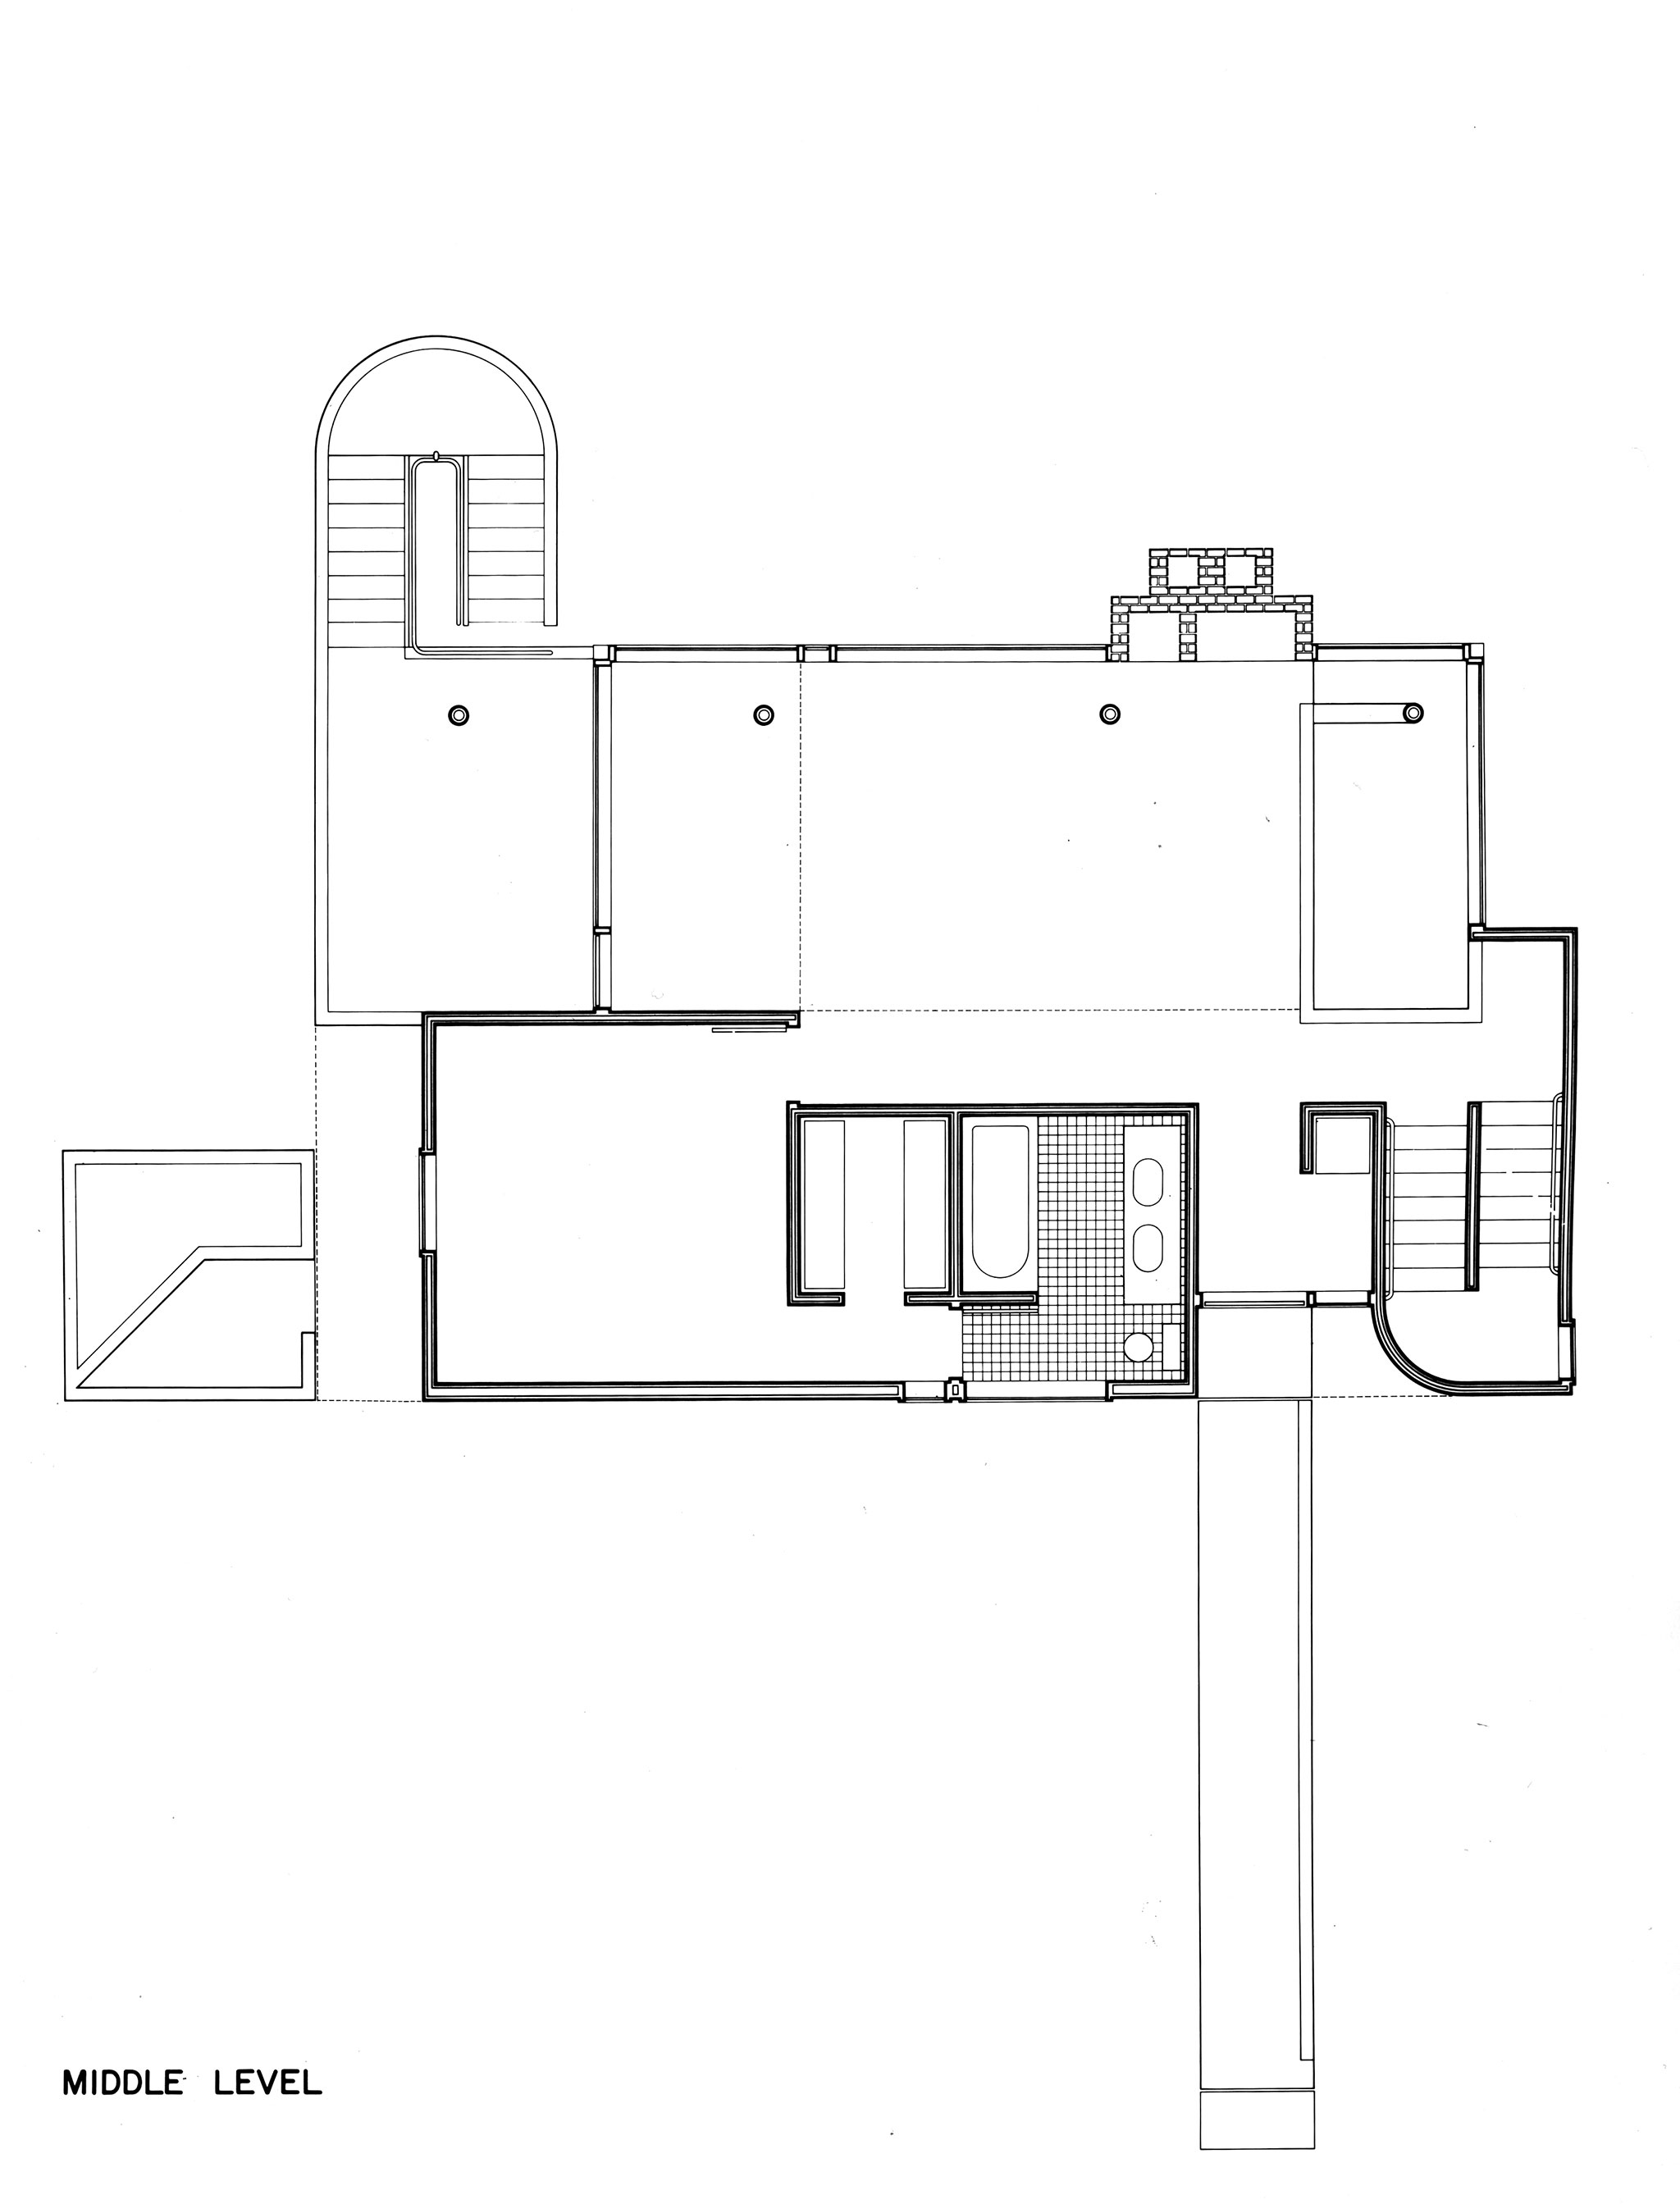 The Smith House by Richard Meier, celebrates 50 years with